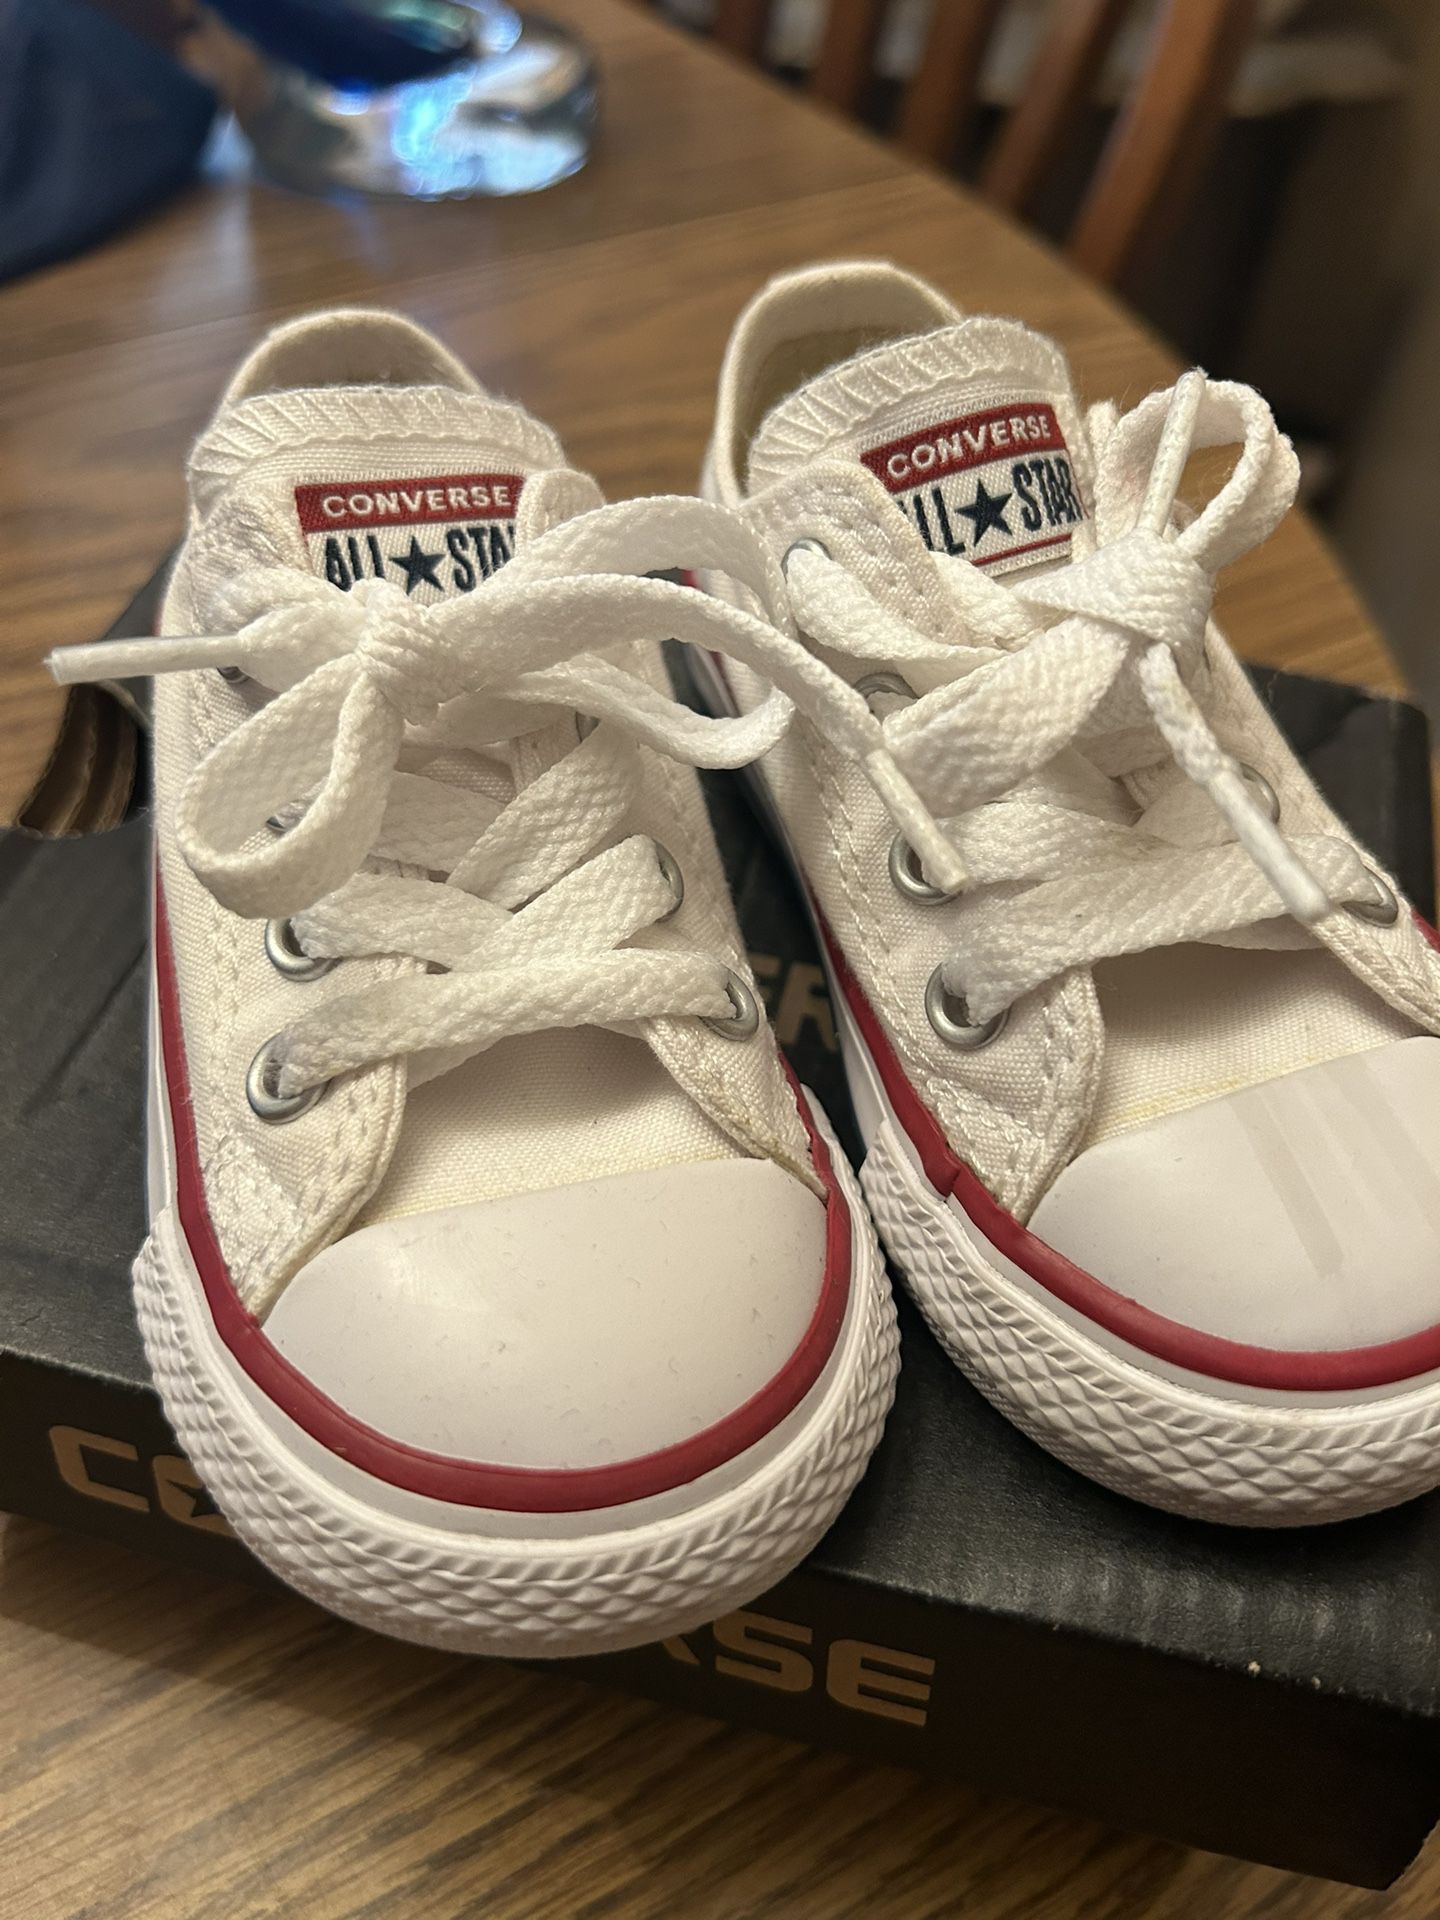 Converse Chuck Taylor All Star sneakers infant size 5